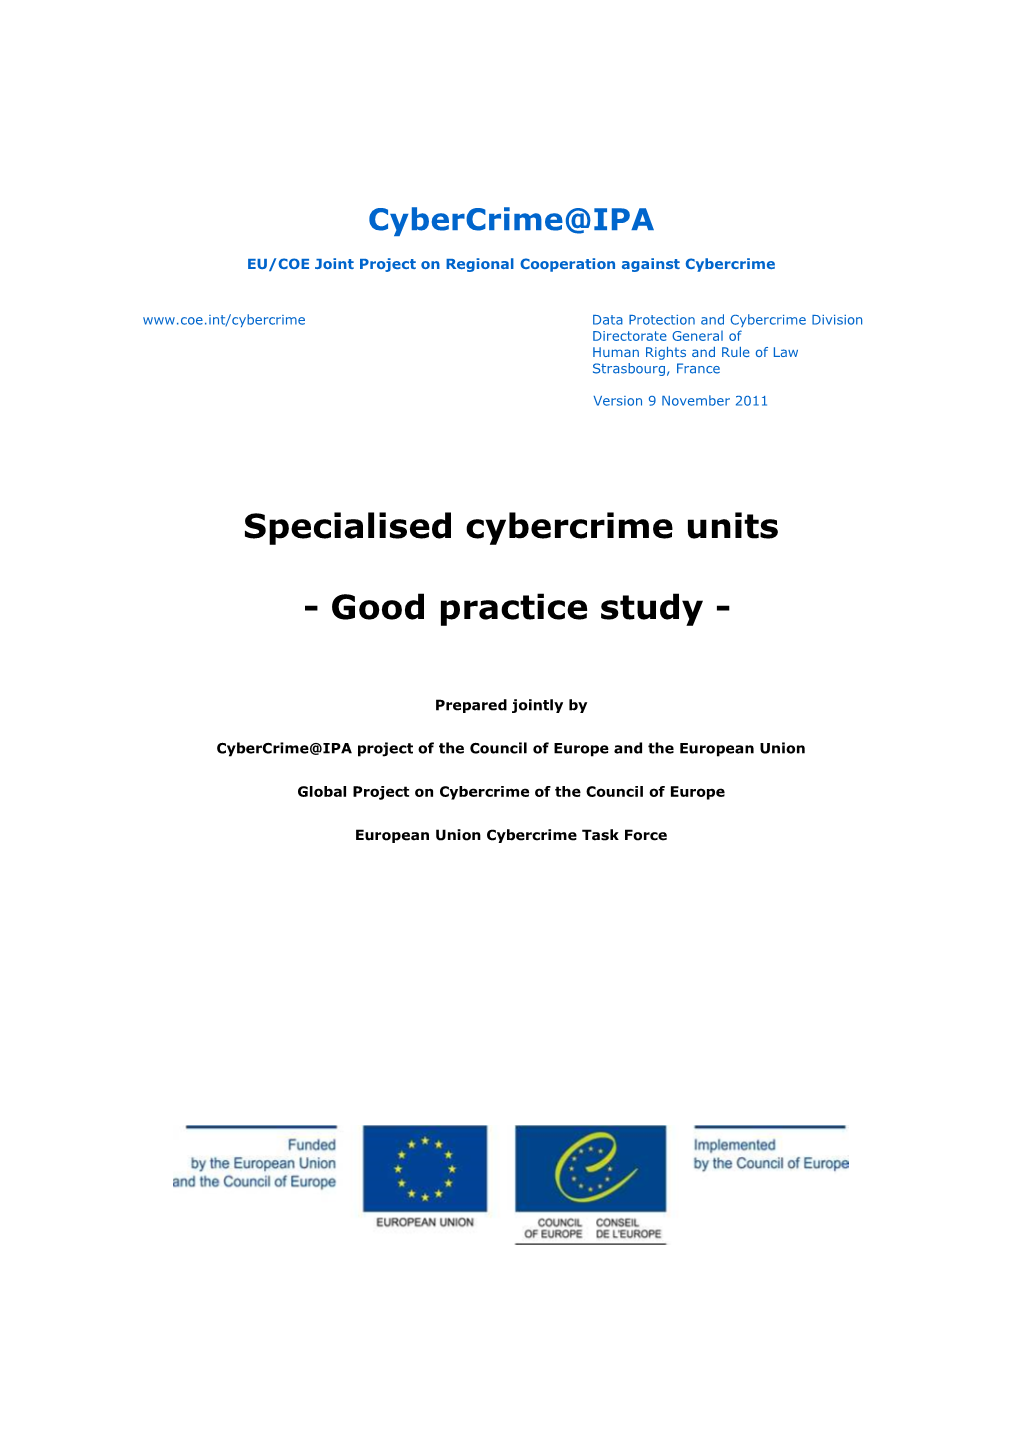 Specialised Cybercrime Units